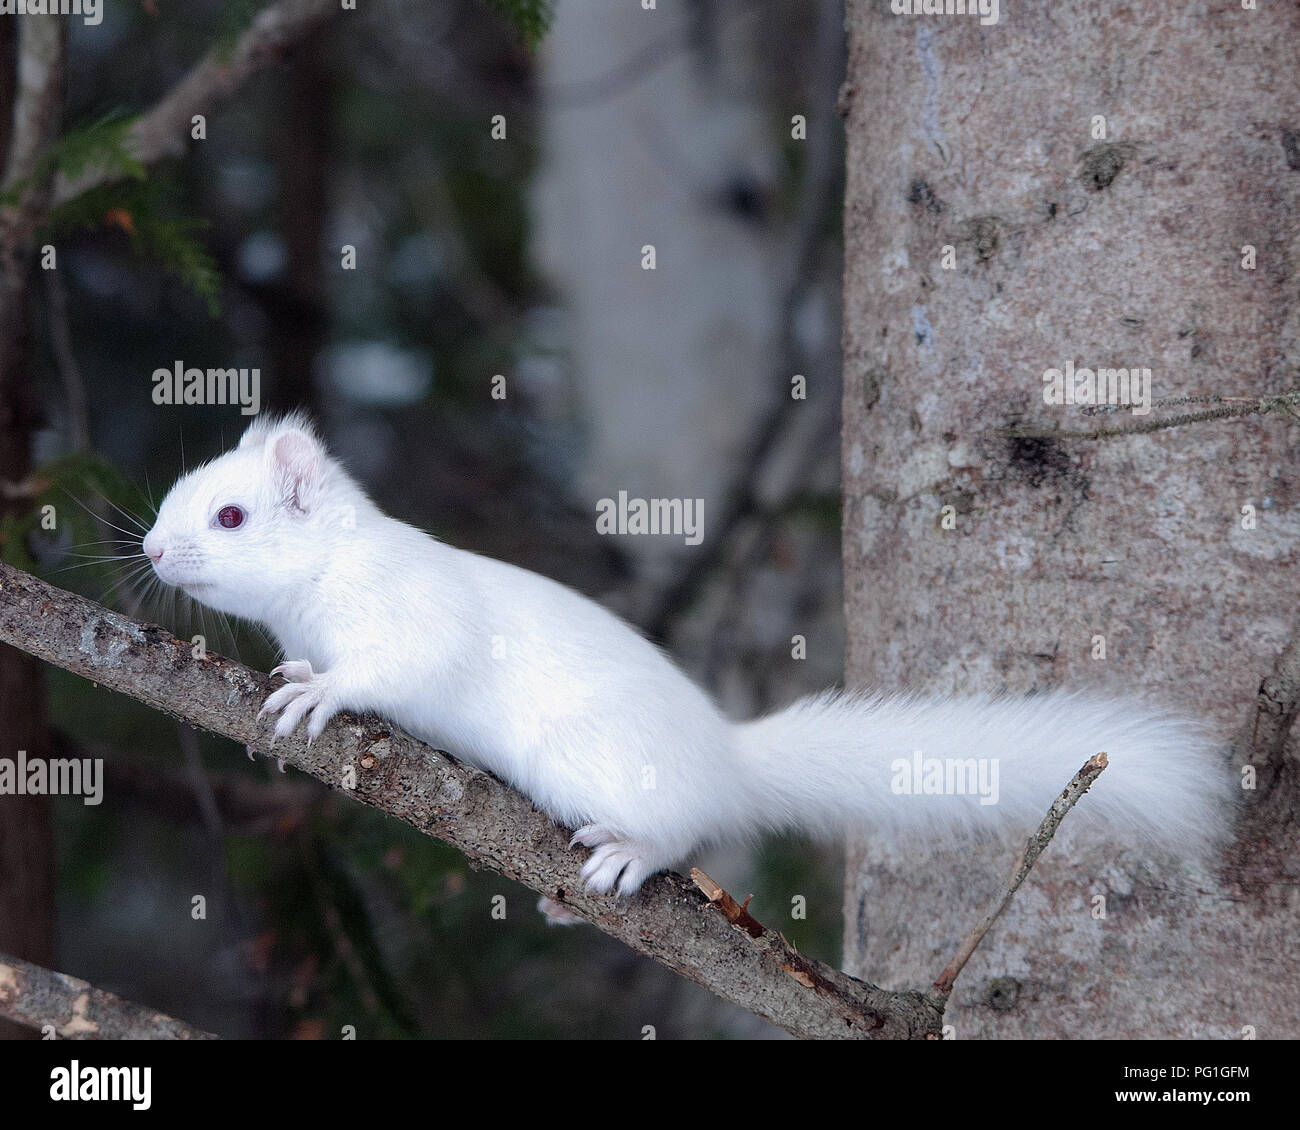 Albino Squirrel sitting on a branch in the wilderness displaying white fur, pink ears, red eyes in its environment and habitat. Stock Photo